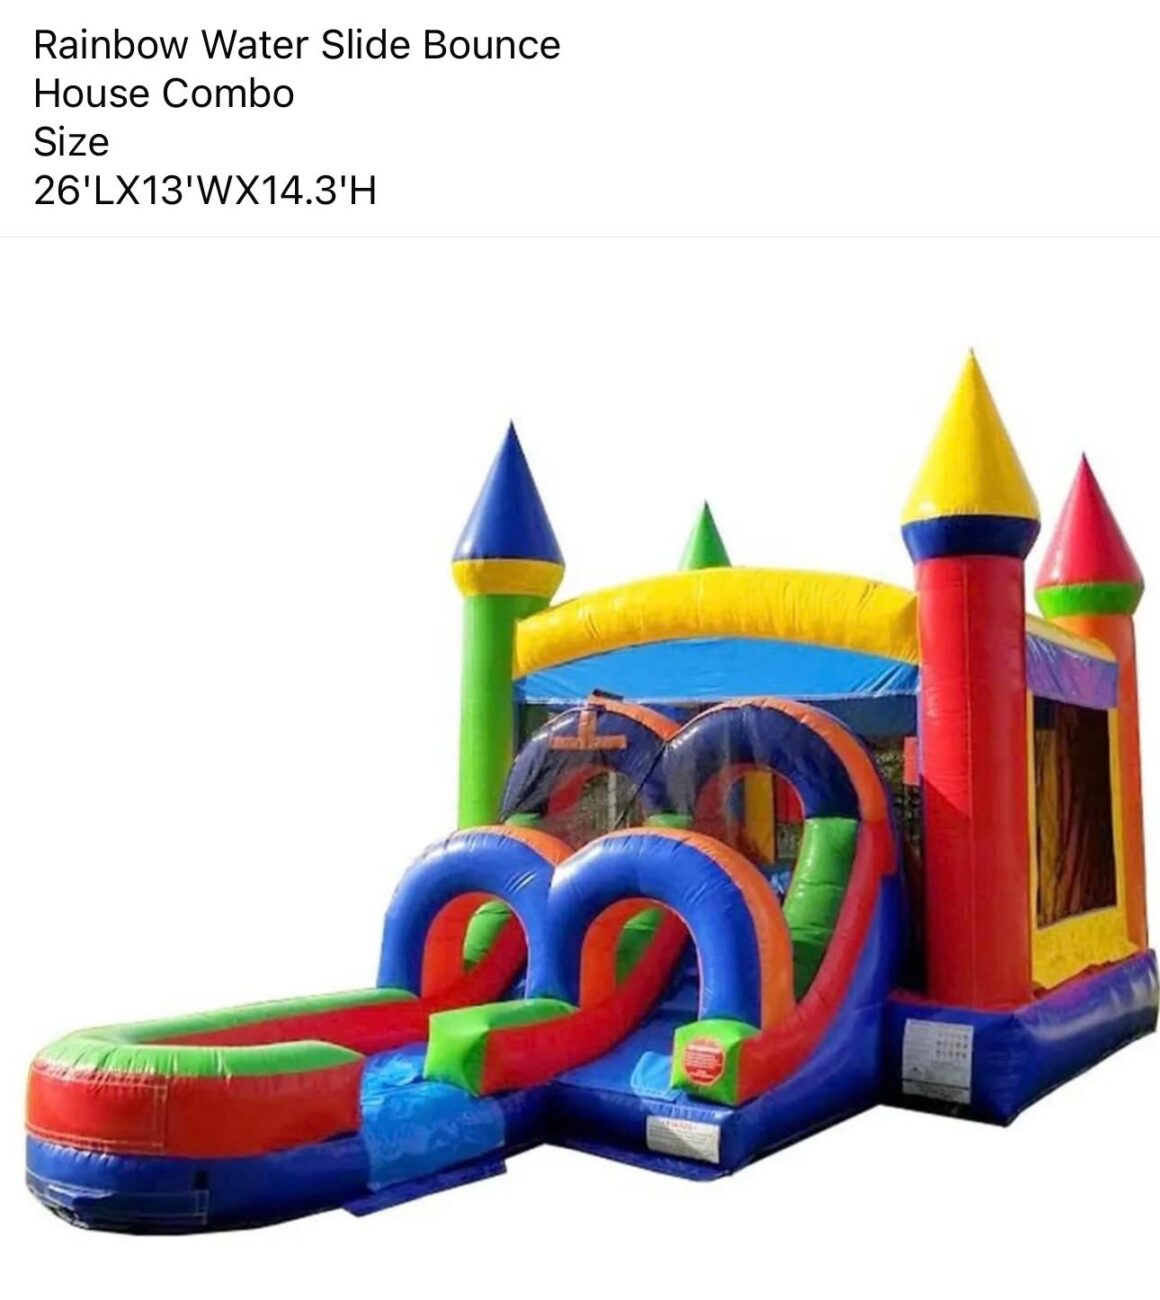 Inflatable Rainbow Water Slide Bounce House Combo - SIZE 26 LX13 WX14.3 H